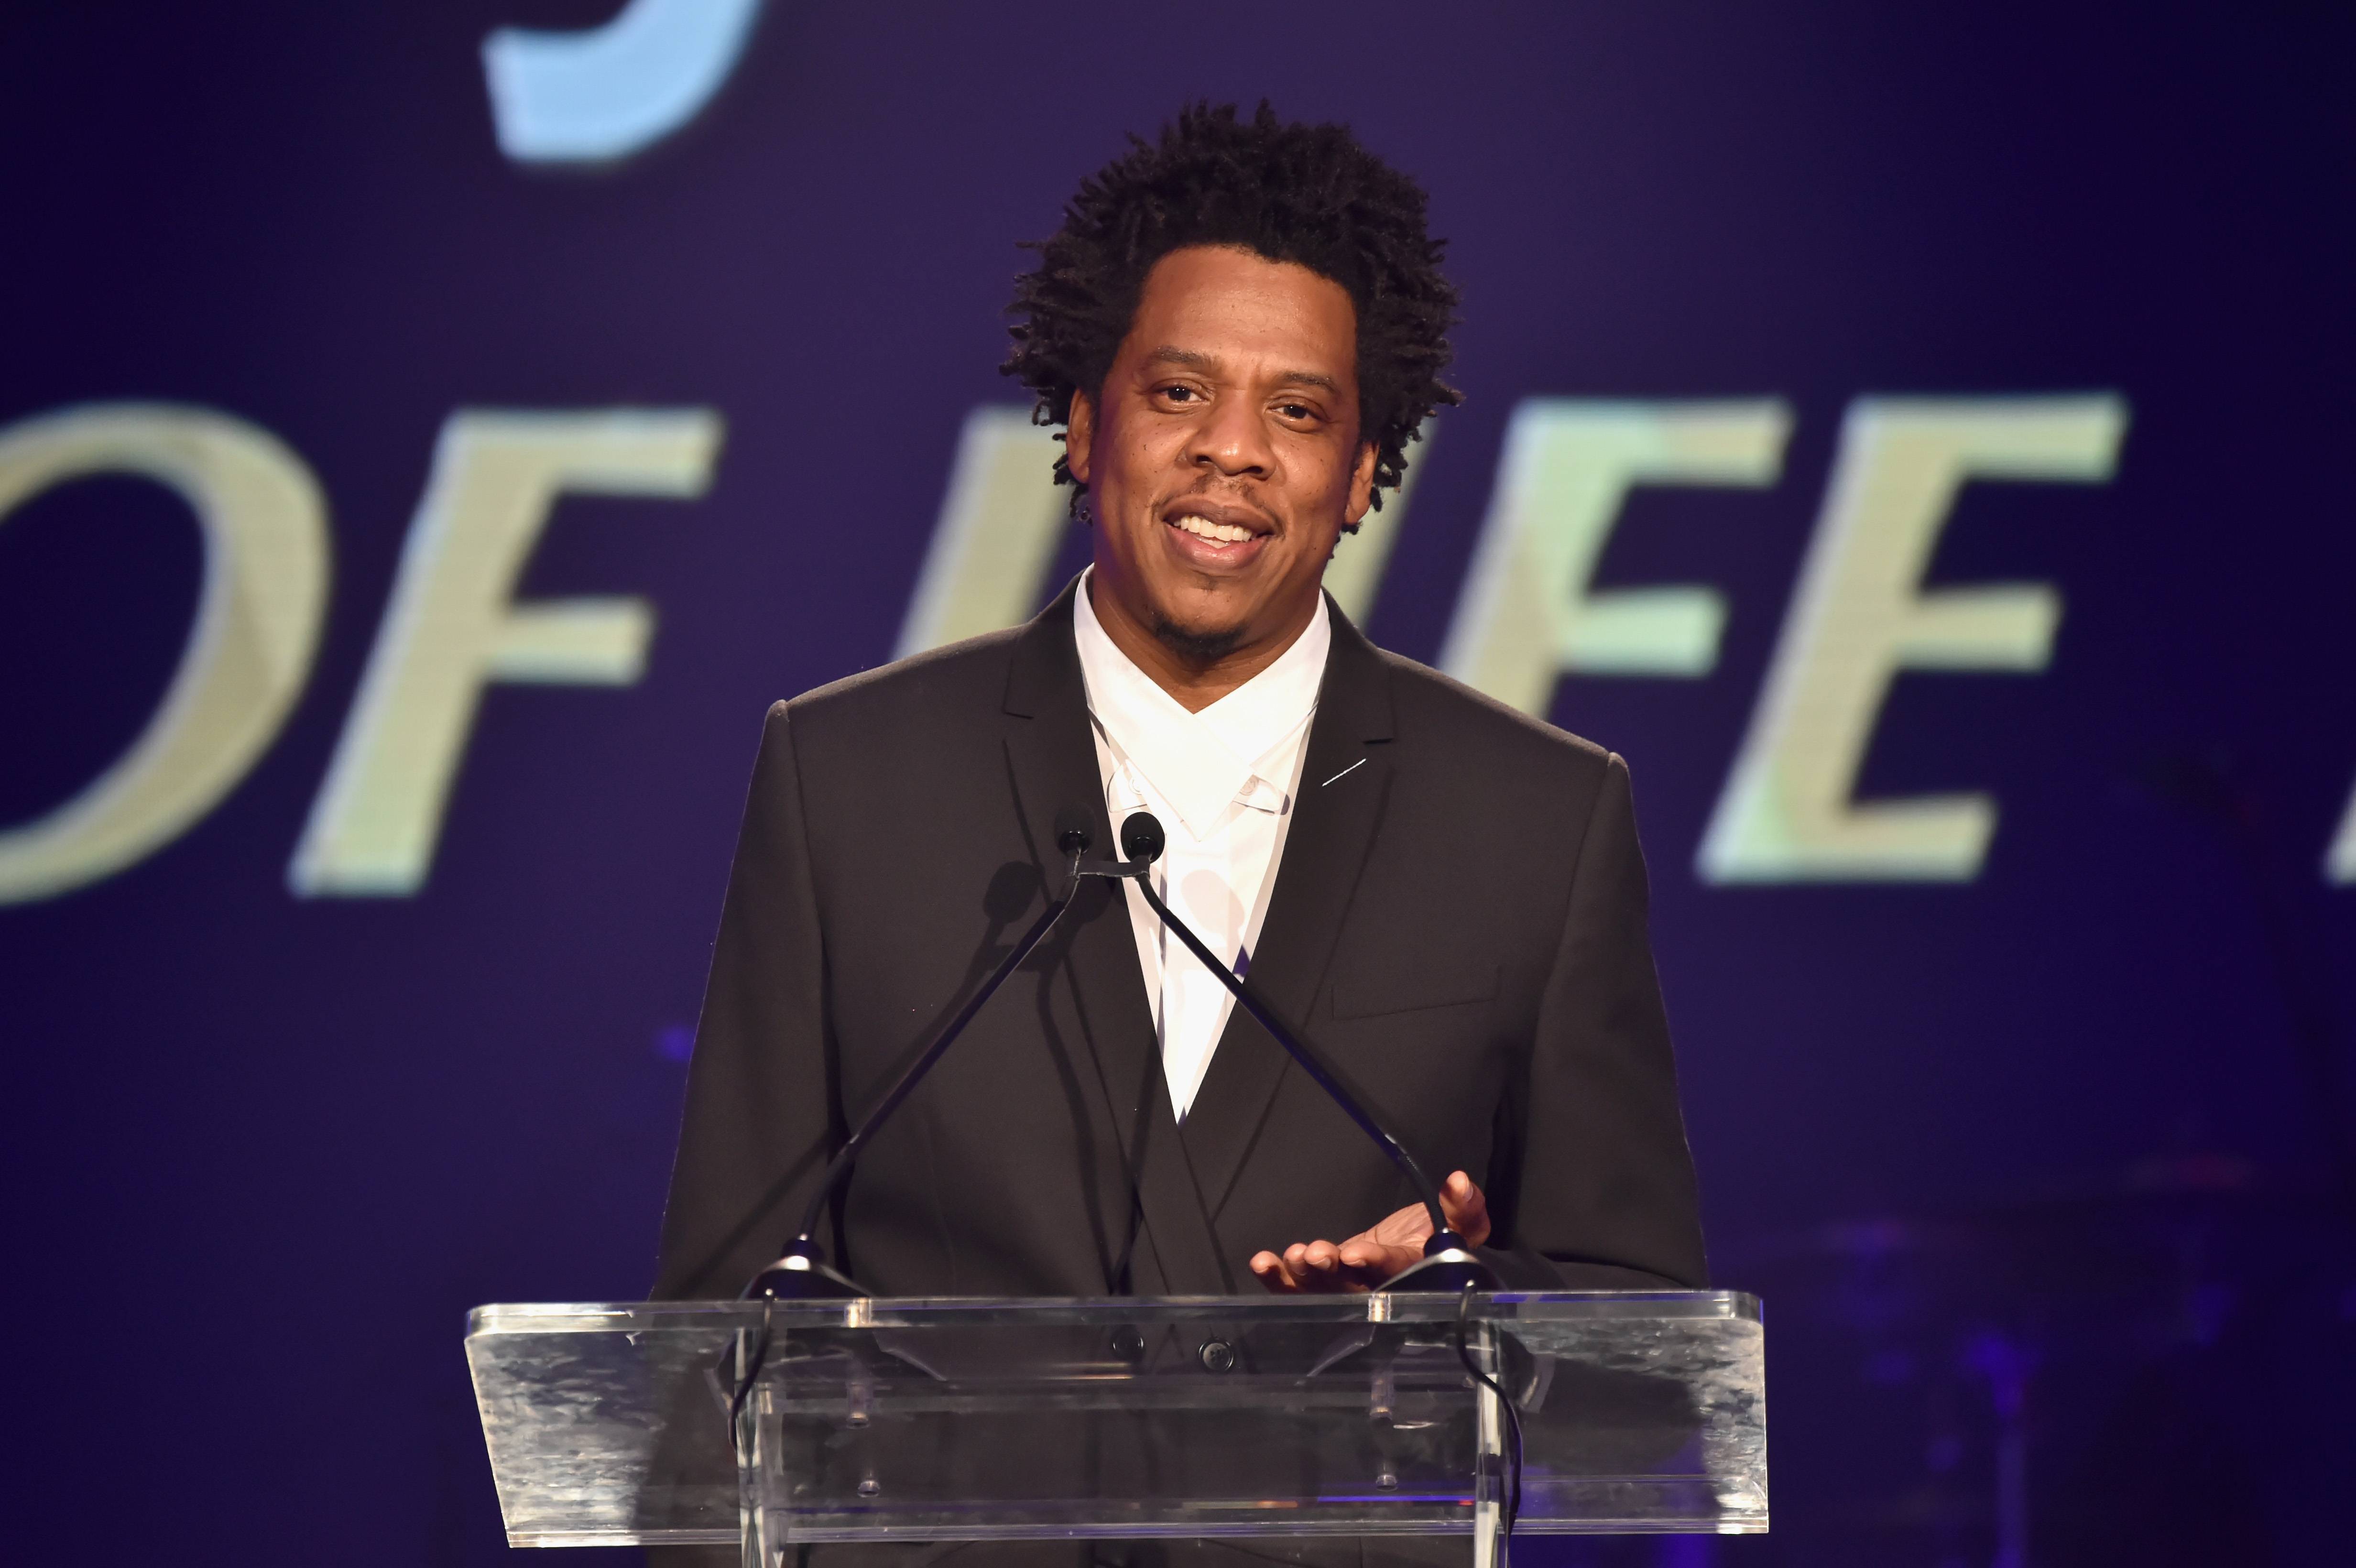 Forbes: Jay-Z is now hip-hop's first billionaire